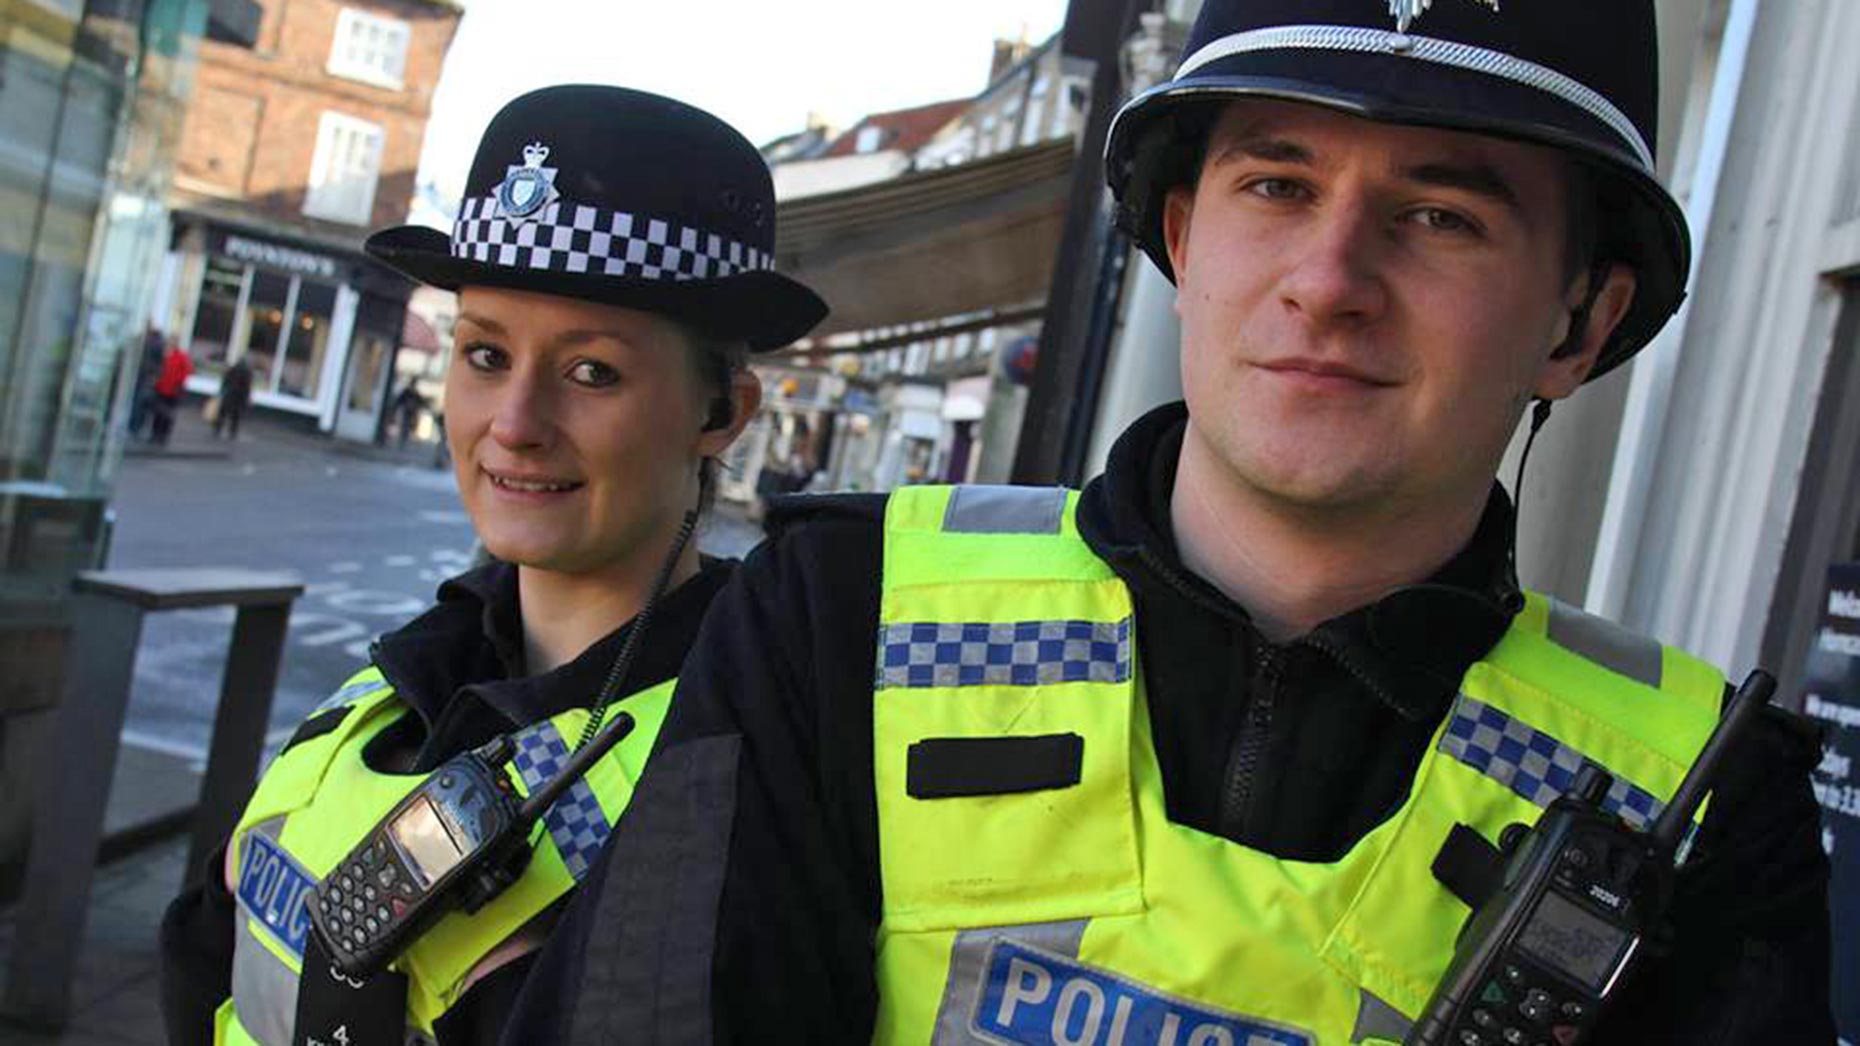 Police trial banning powers in Lincoln nightlife zones